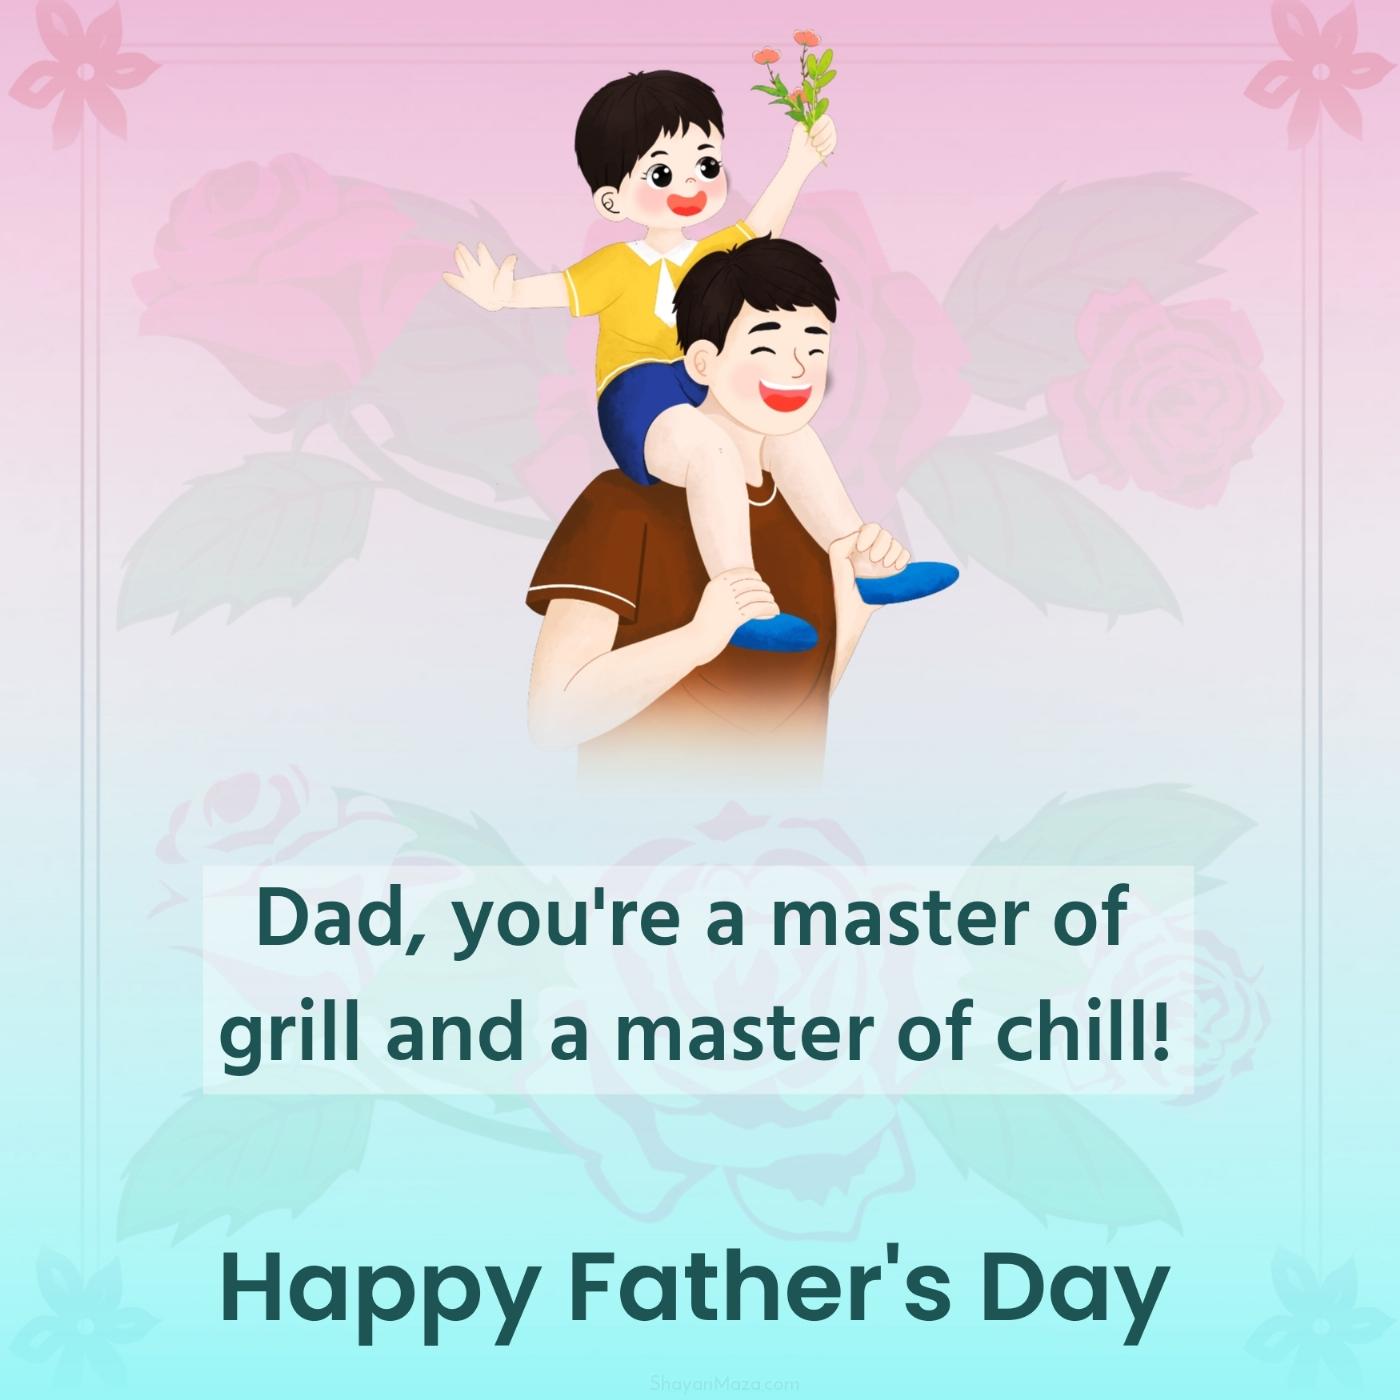 Dad you're a master of grill and a master of chill!